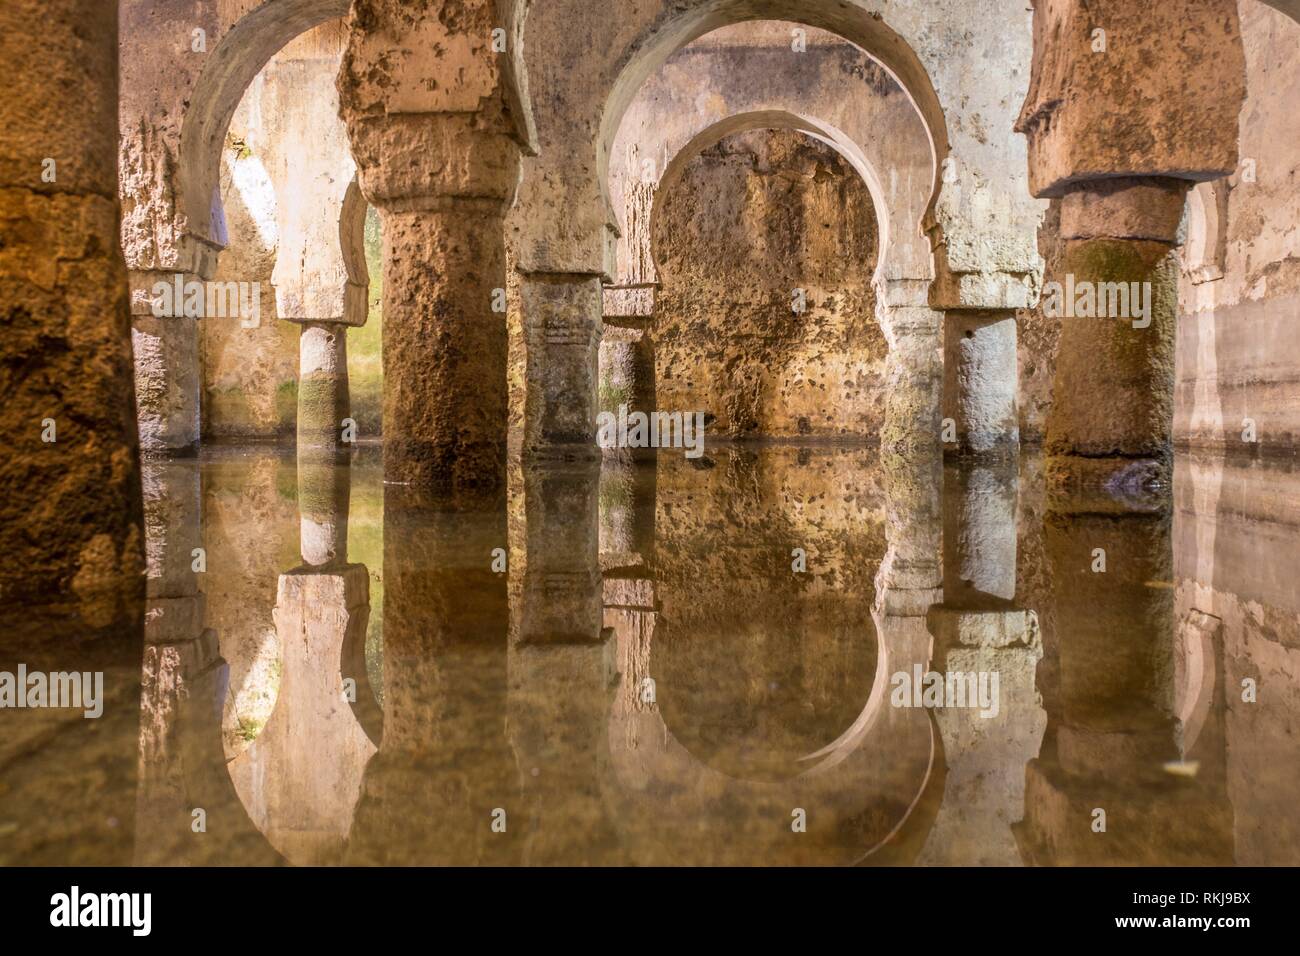 Arab cistern or Aljibe, former mosque during the Medieval Muslims Rule in Spain, Caceres. Stock Photo